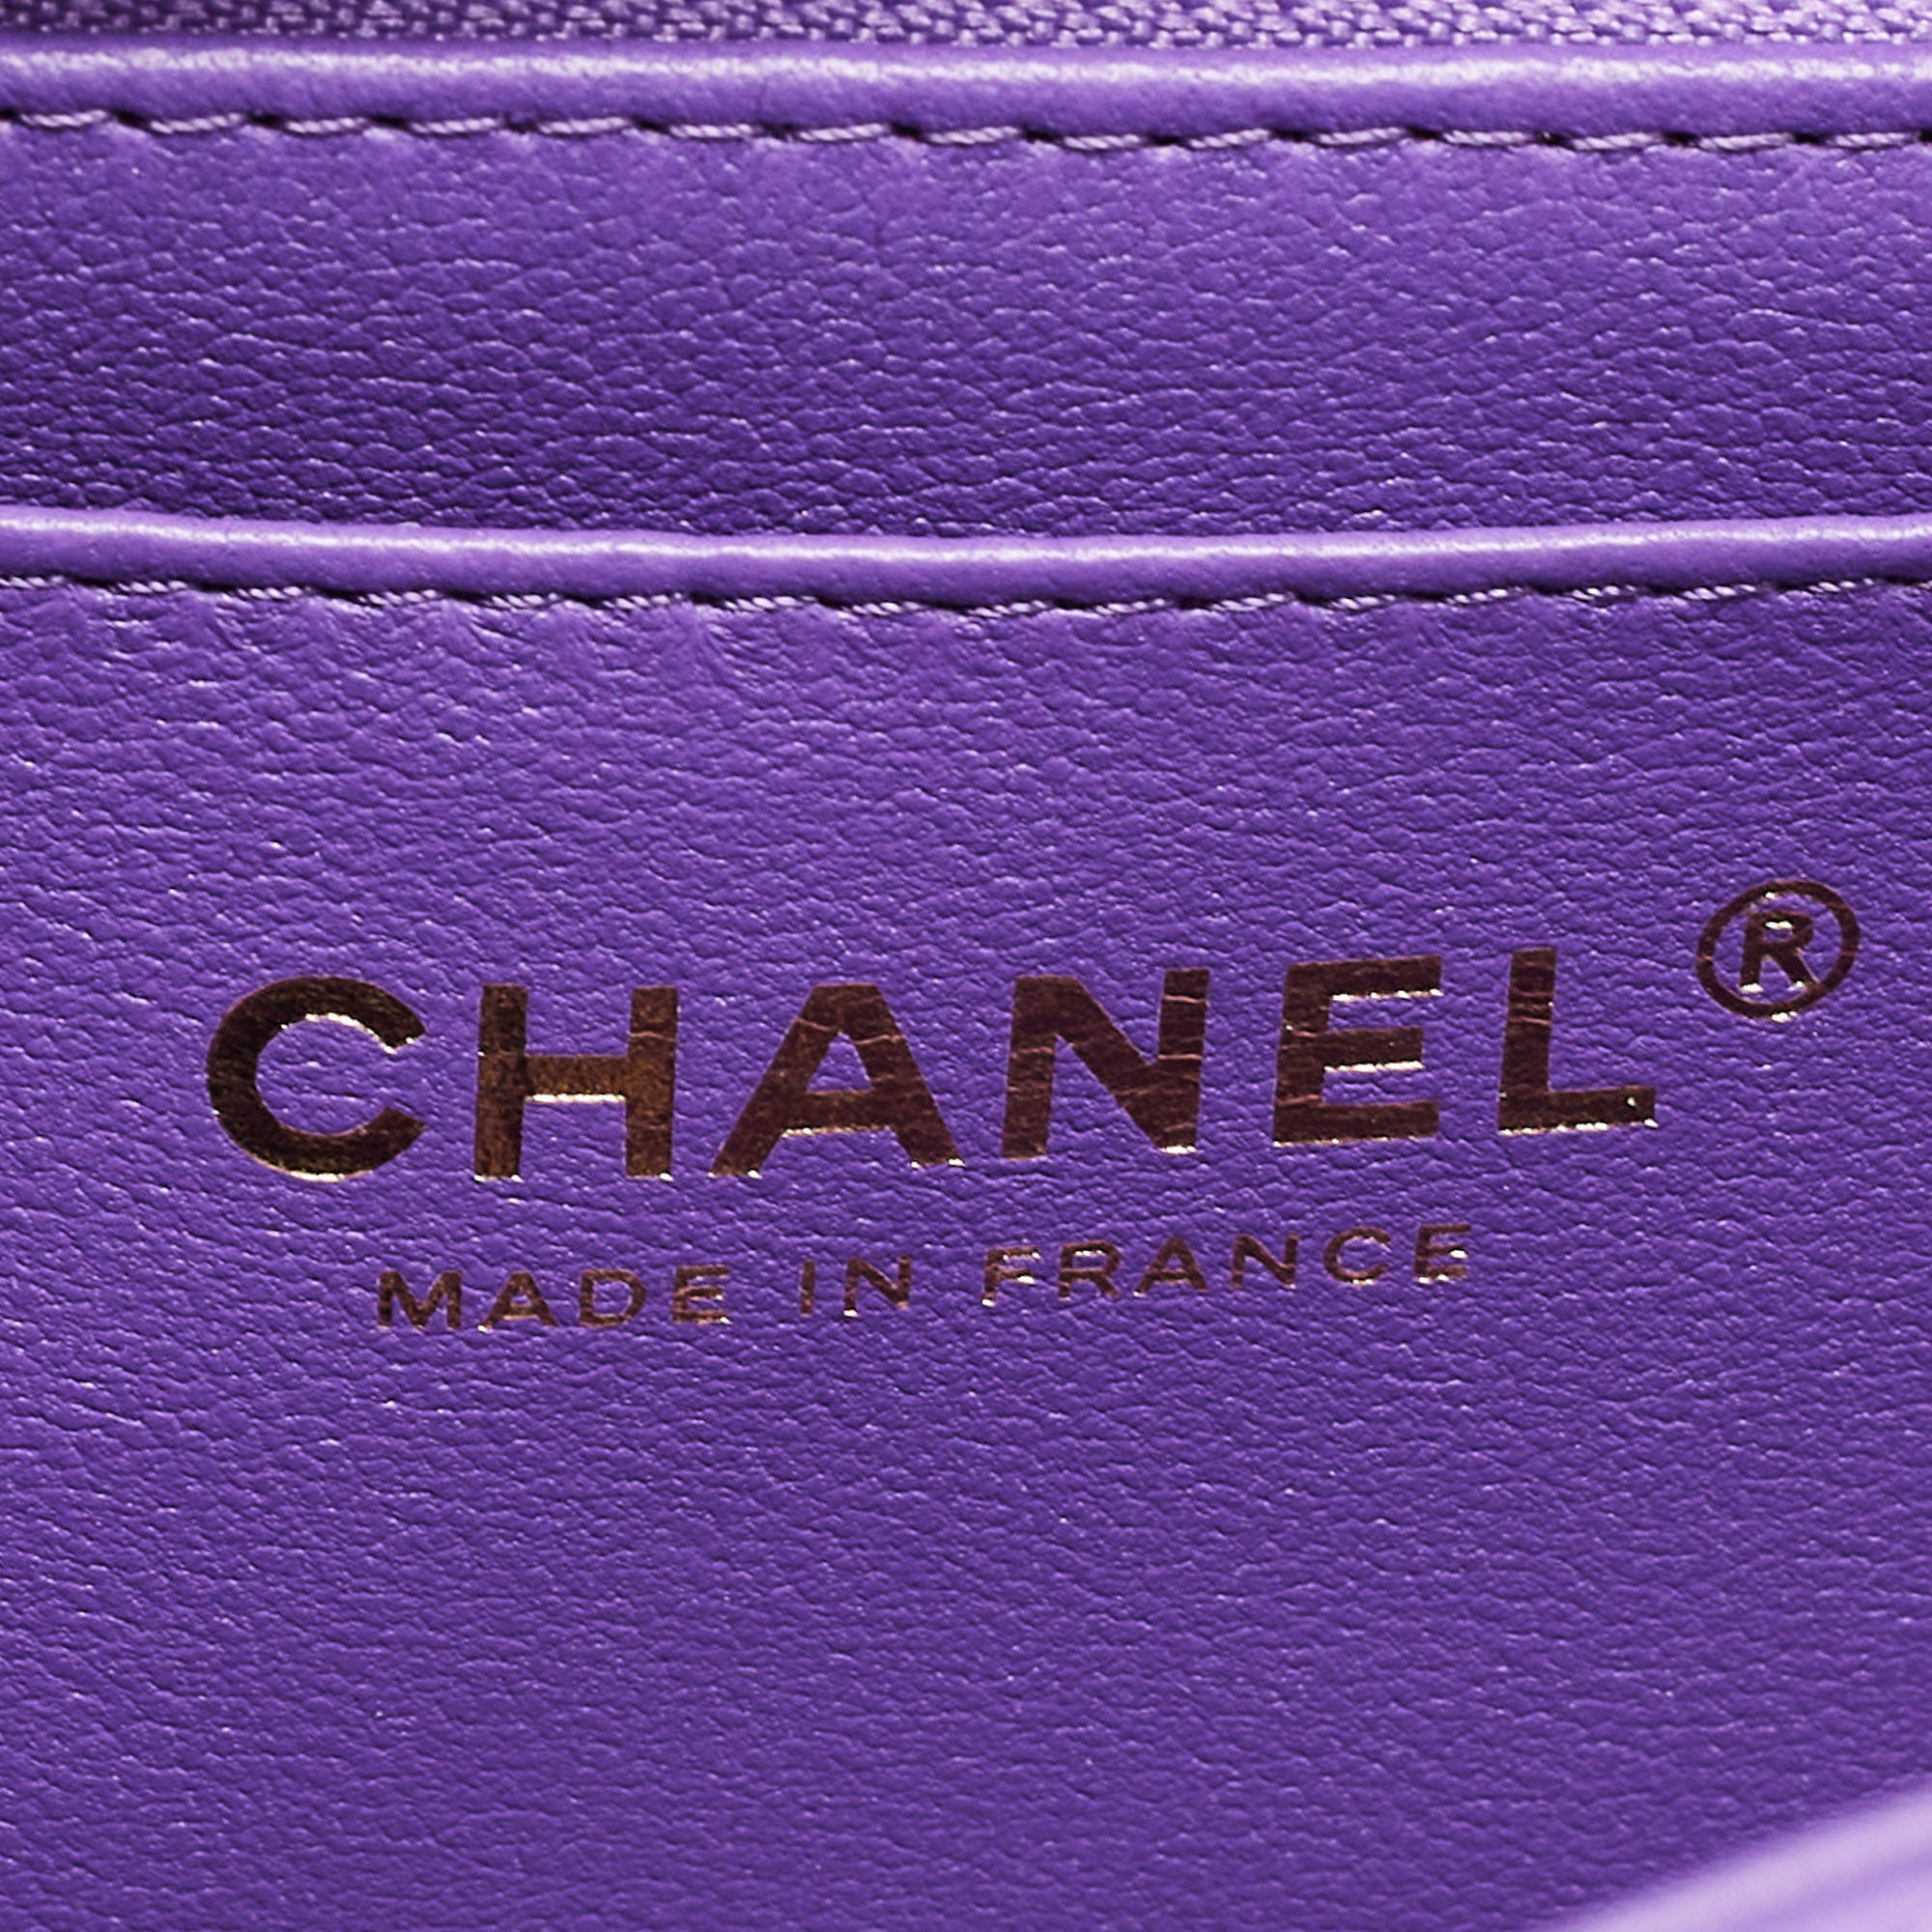 Chanel Purple Quilted Leather Mini Classic Top Handle Bag